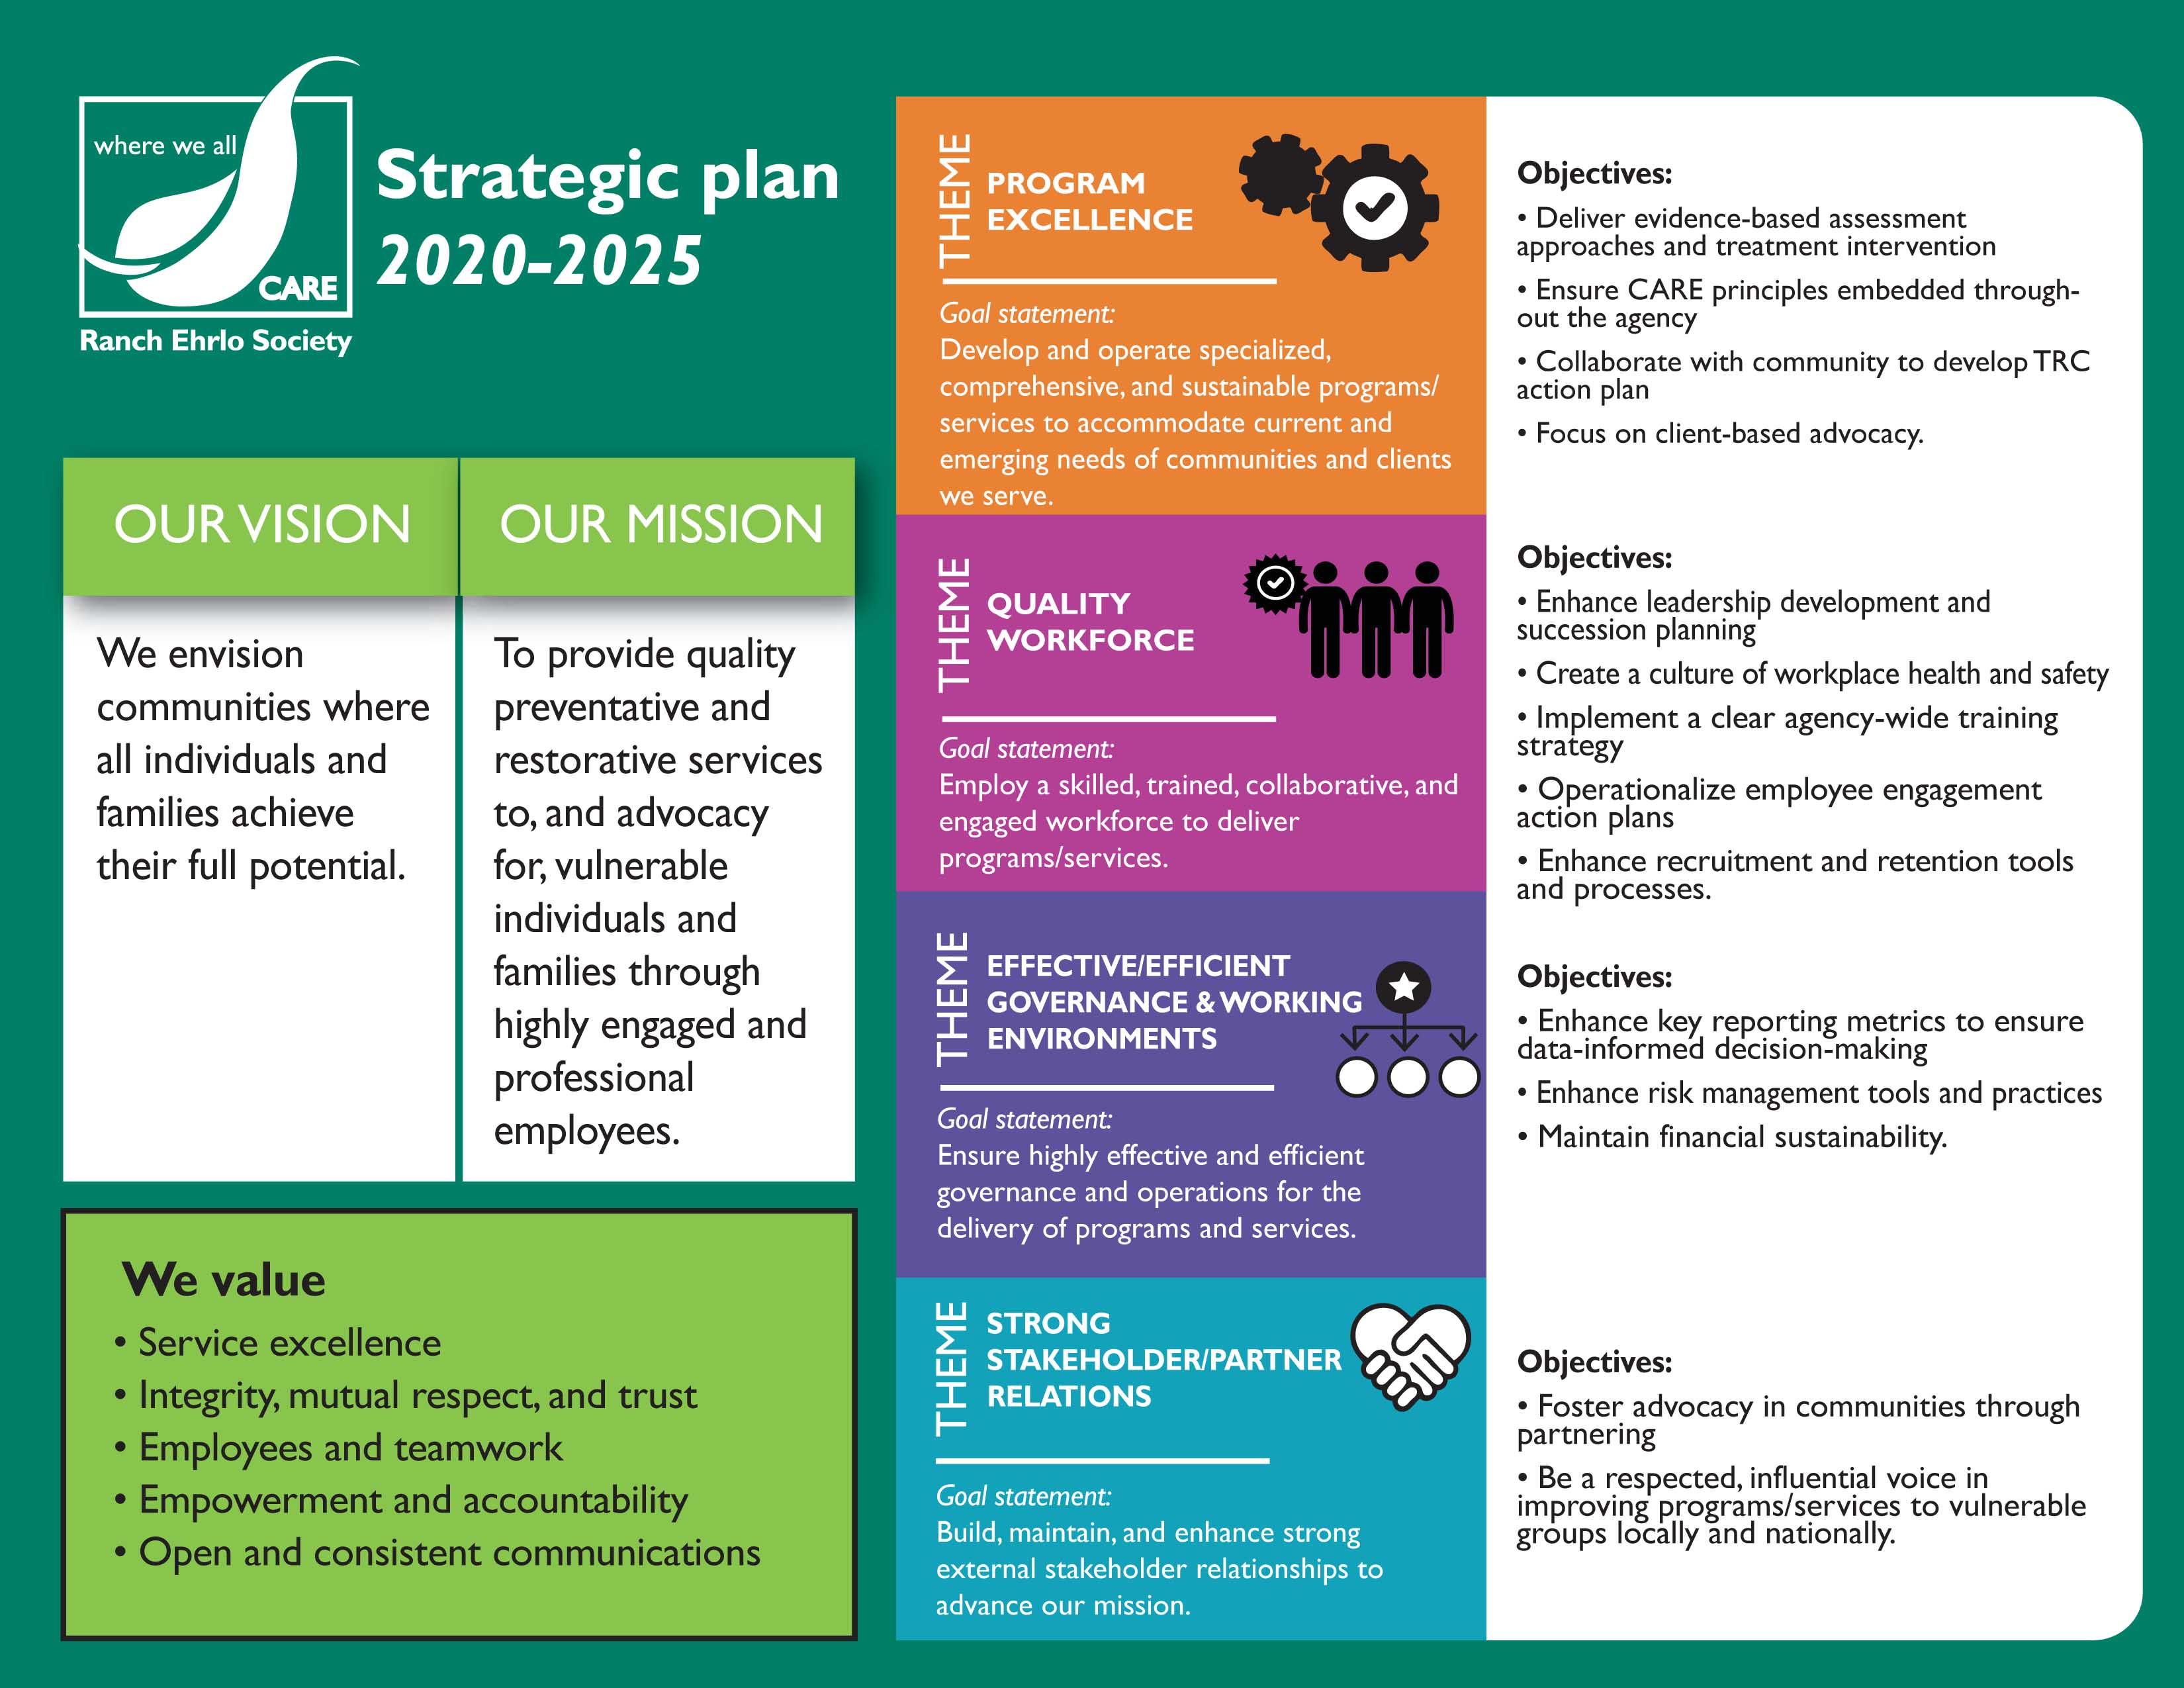 Ranch Ehrlo Strategic plan 2020-2025. We envision communities where all individuals and families achieve their full potential. Our mission is to provide quality preventative and restorative services to, and advocacy for, vulnerable indivivuals and families through highly engaged and professional employees